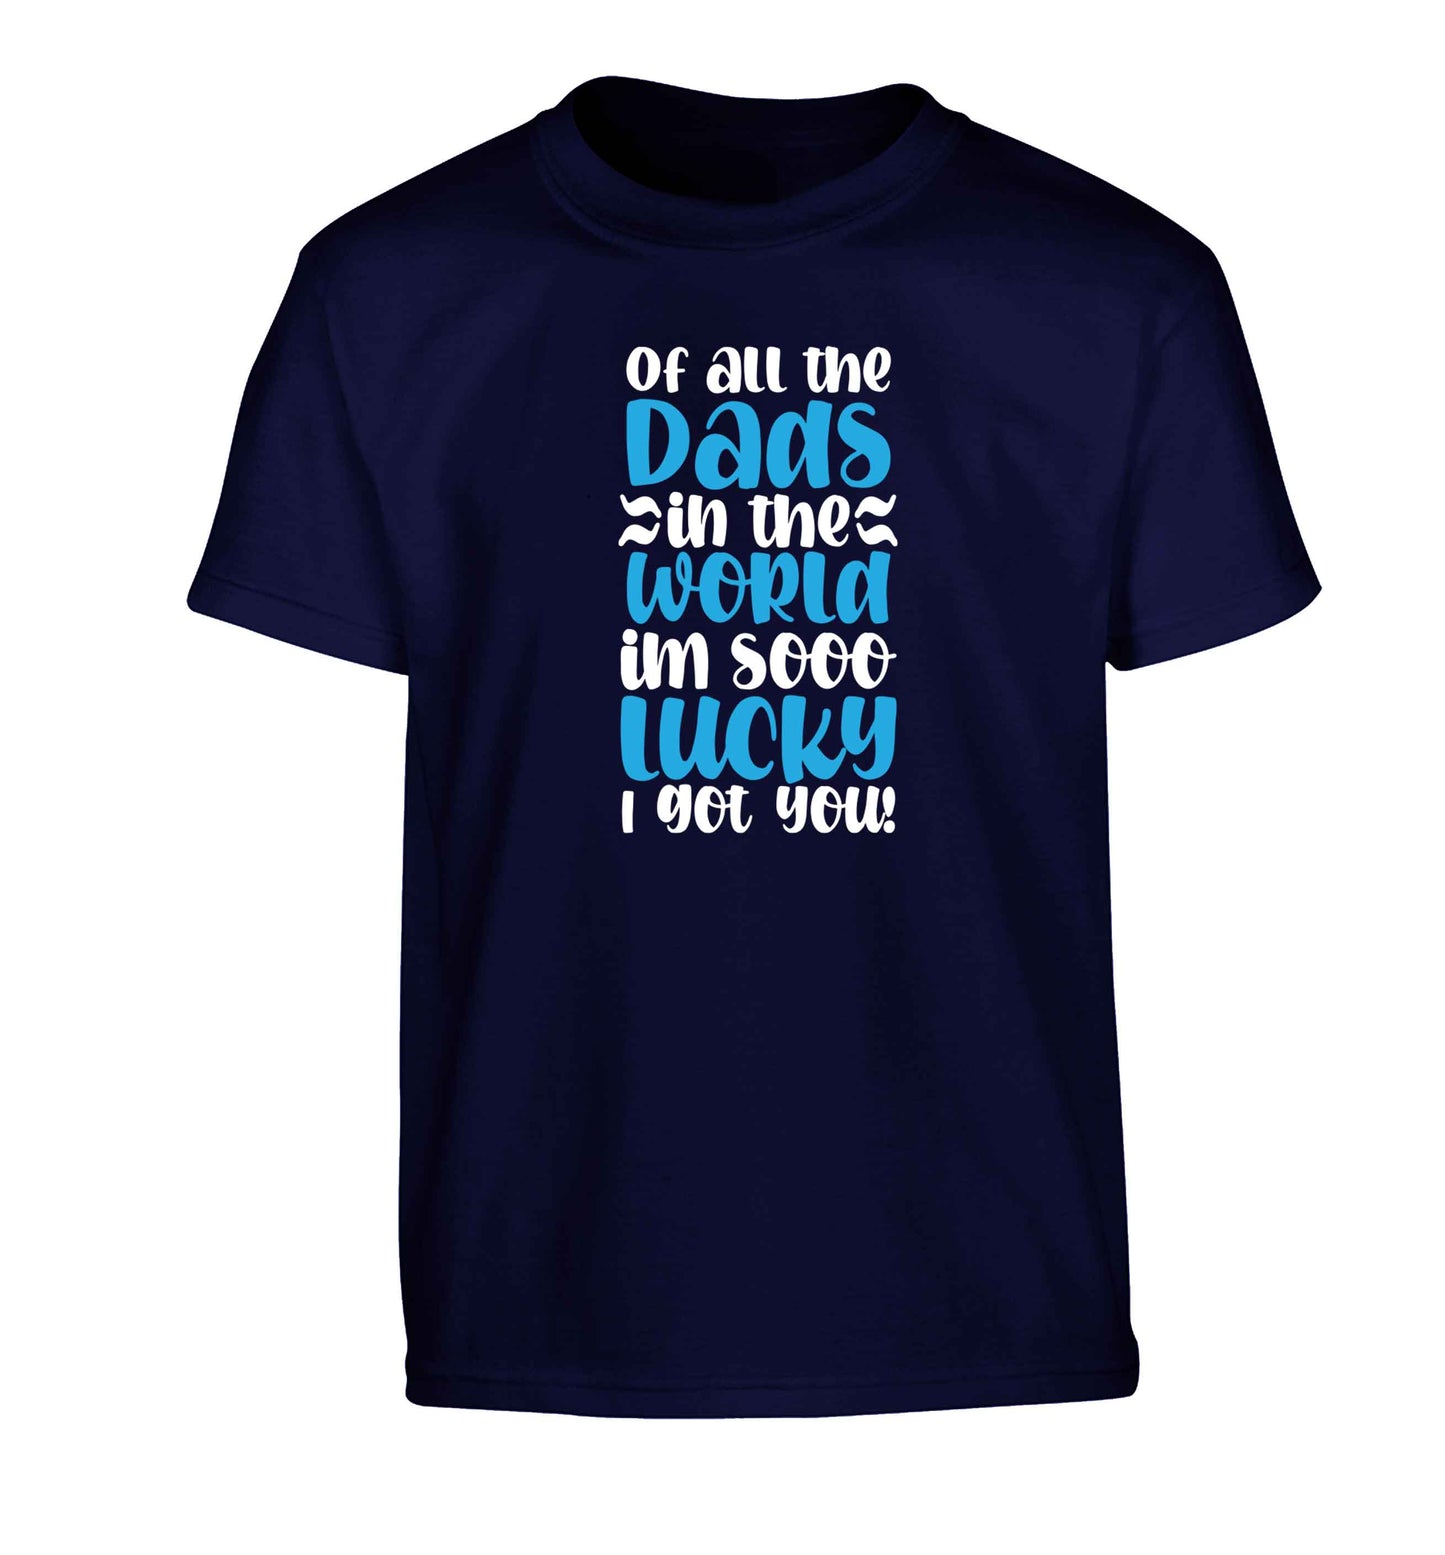 I'm as lucky as can be the worlds greatest dad belongs to me! Children's navy Tshirt 12-13 Years